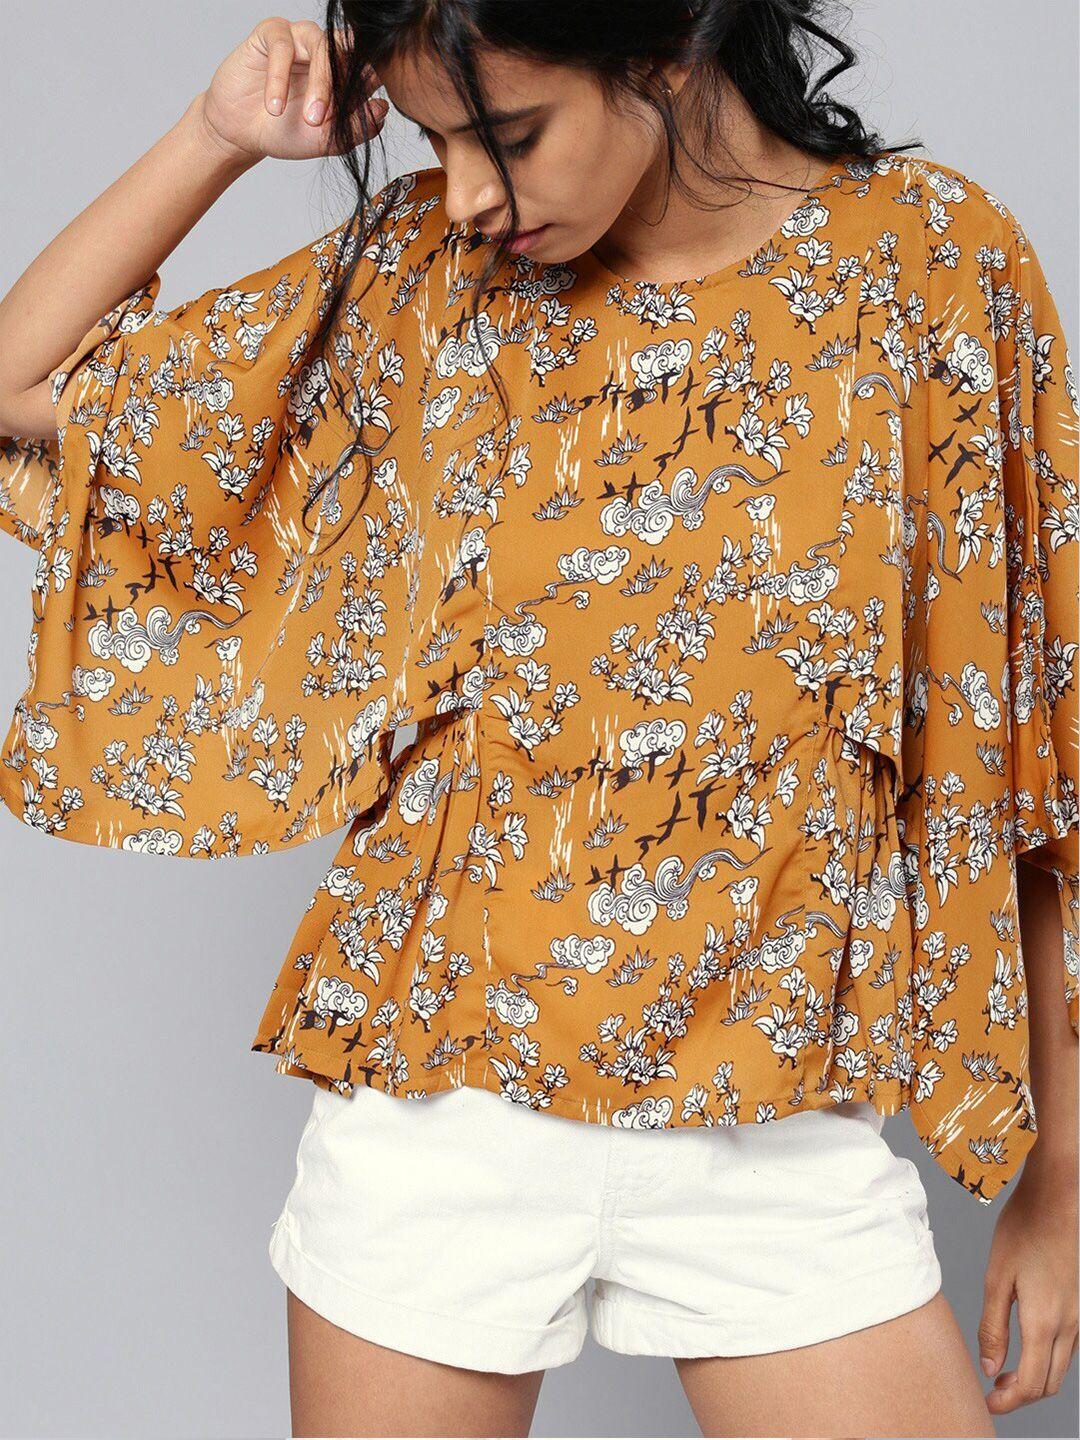 mast & harbour brown floral print tie-up neck puff sleeve cinched waist top